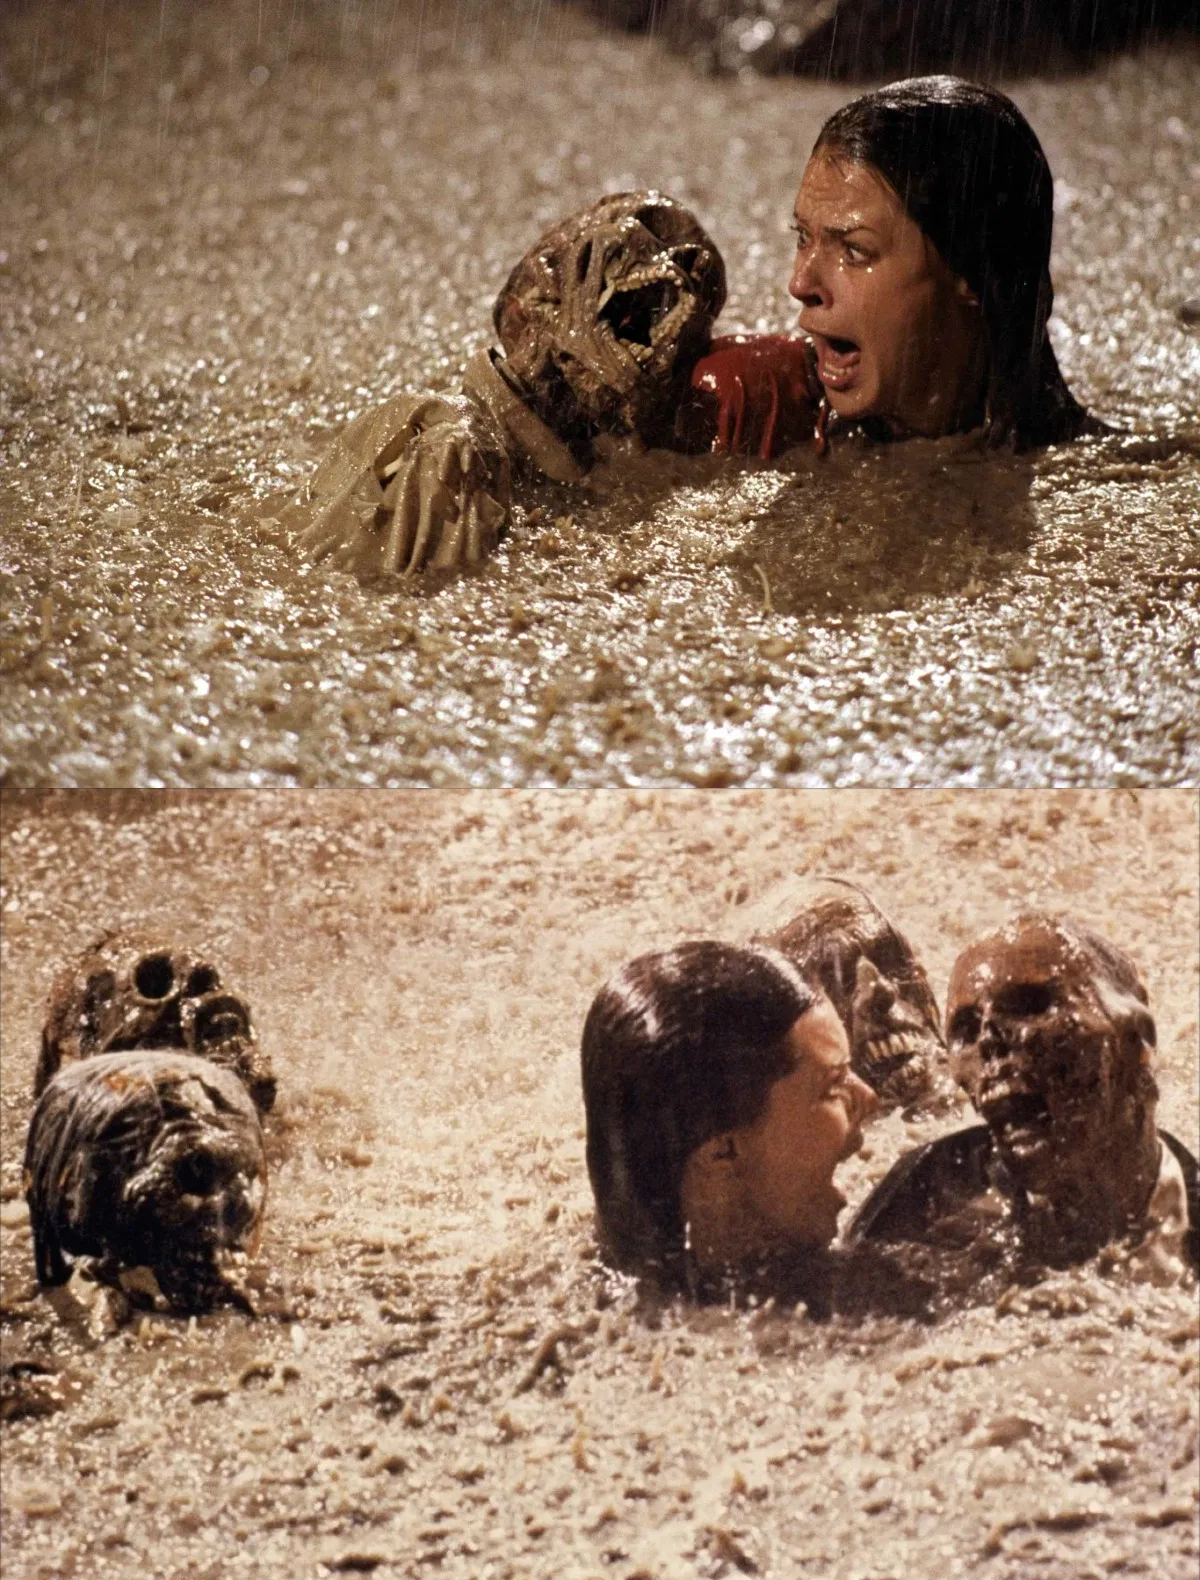 The movie Poltergeist used real skeletons in the pool scene, allegedly.